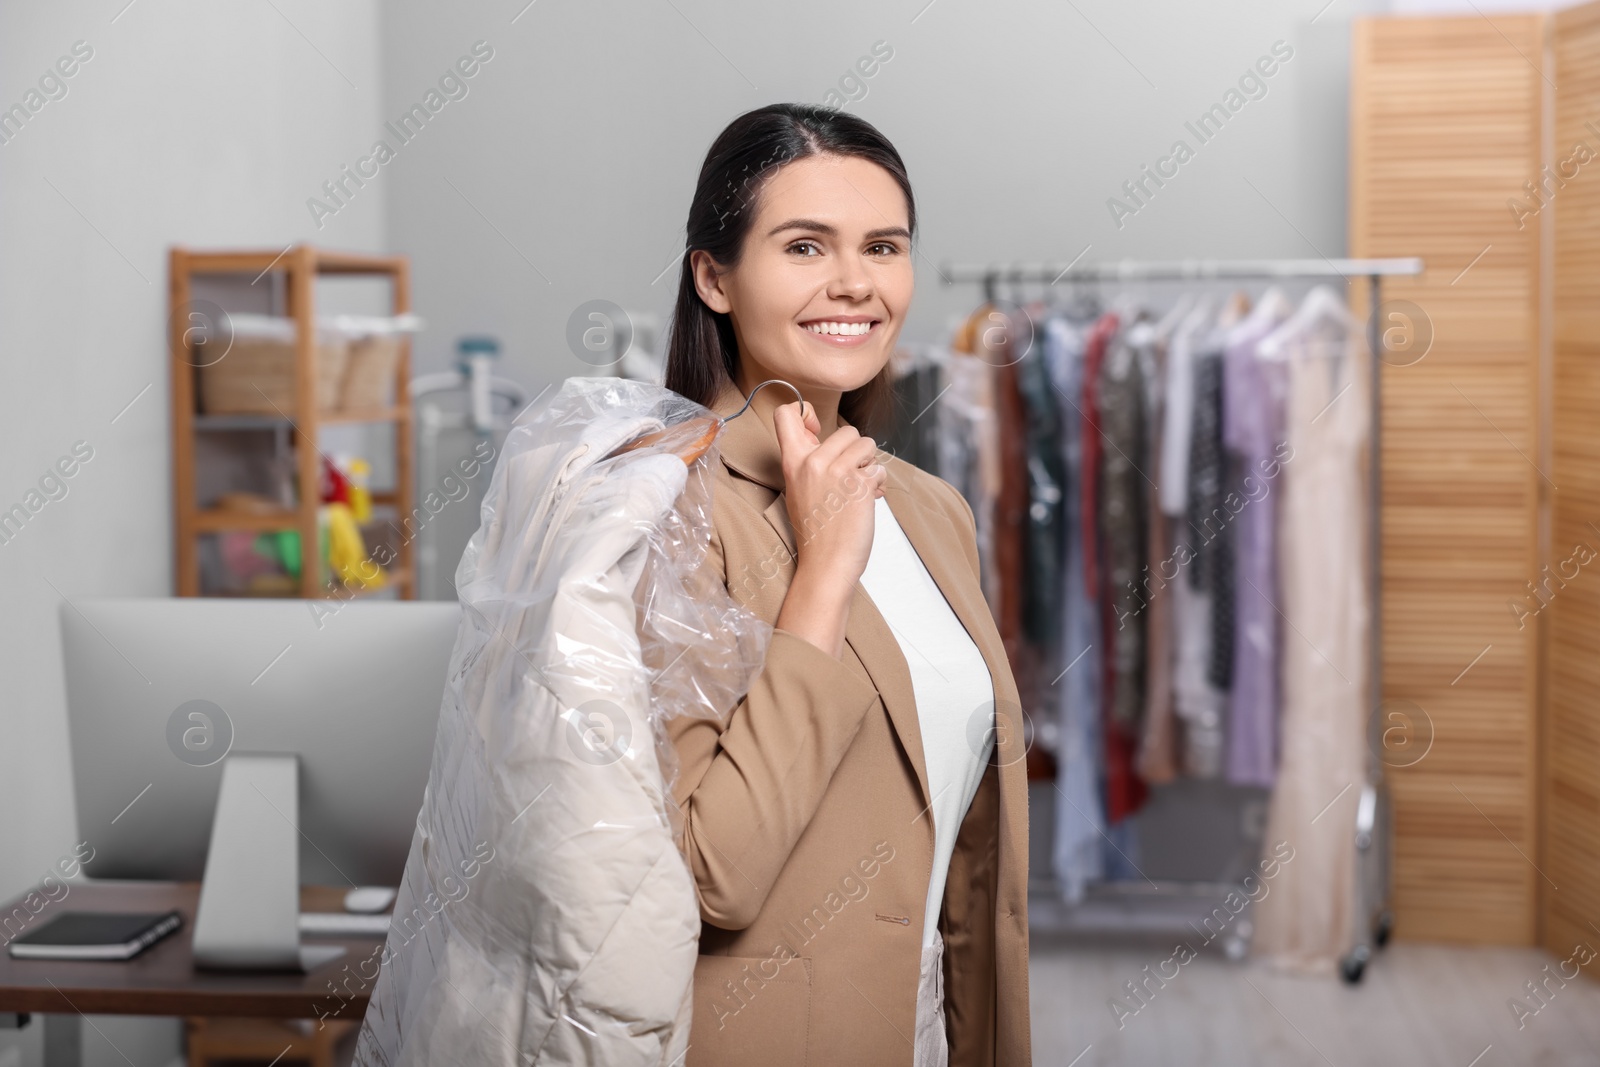 Photo of Dry-cleaning service. Happy woman holding hanger with jacket in plastic bag indoors